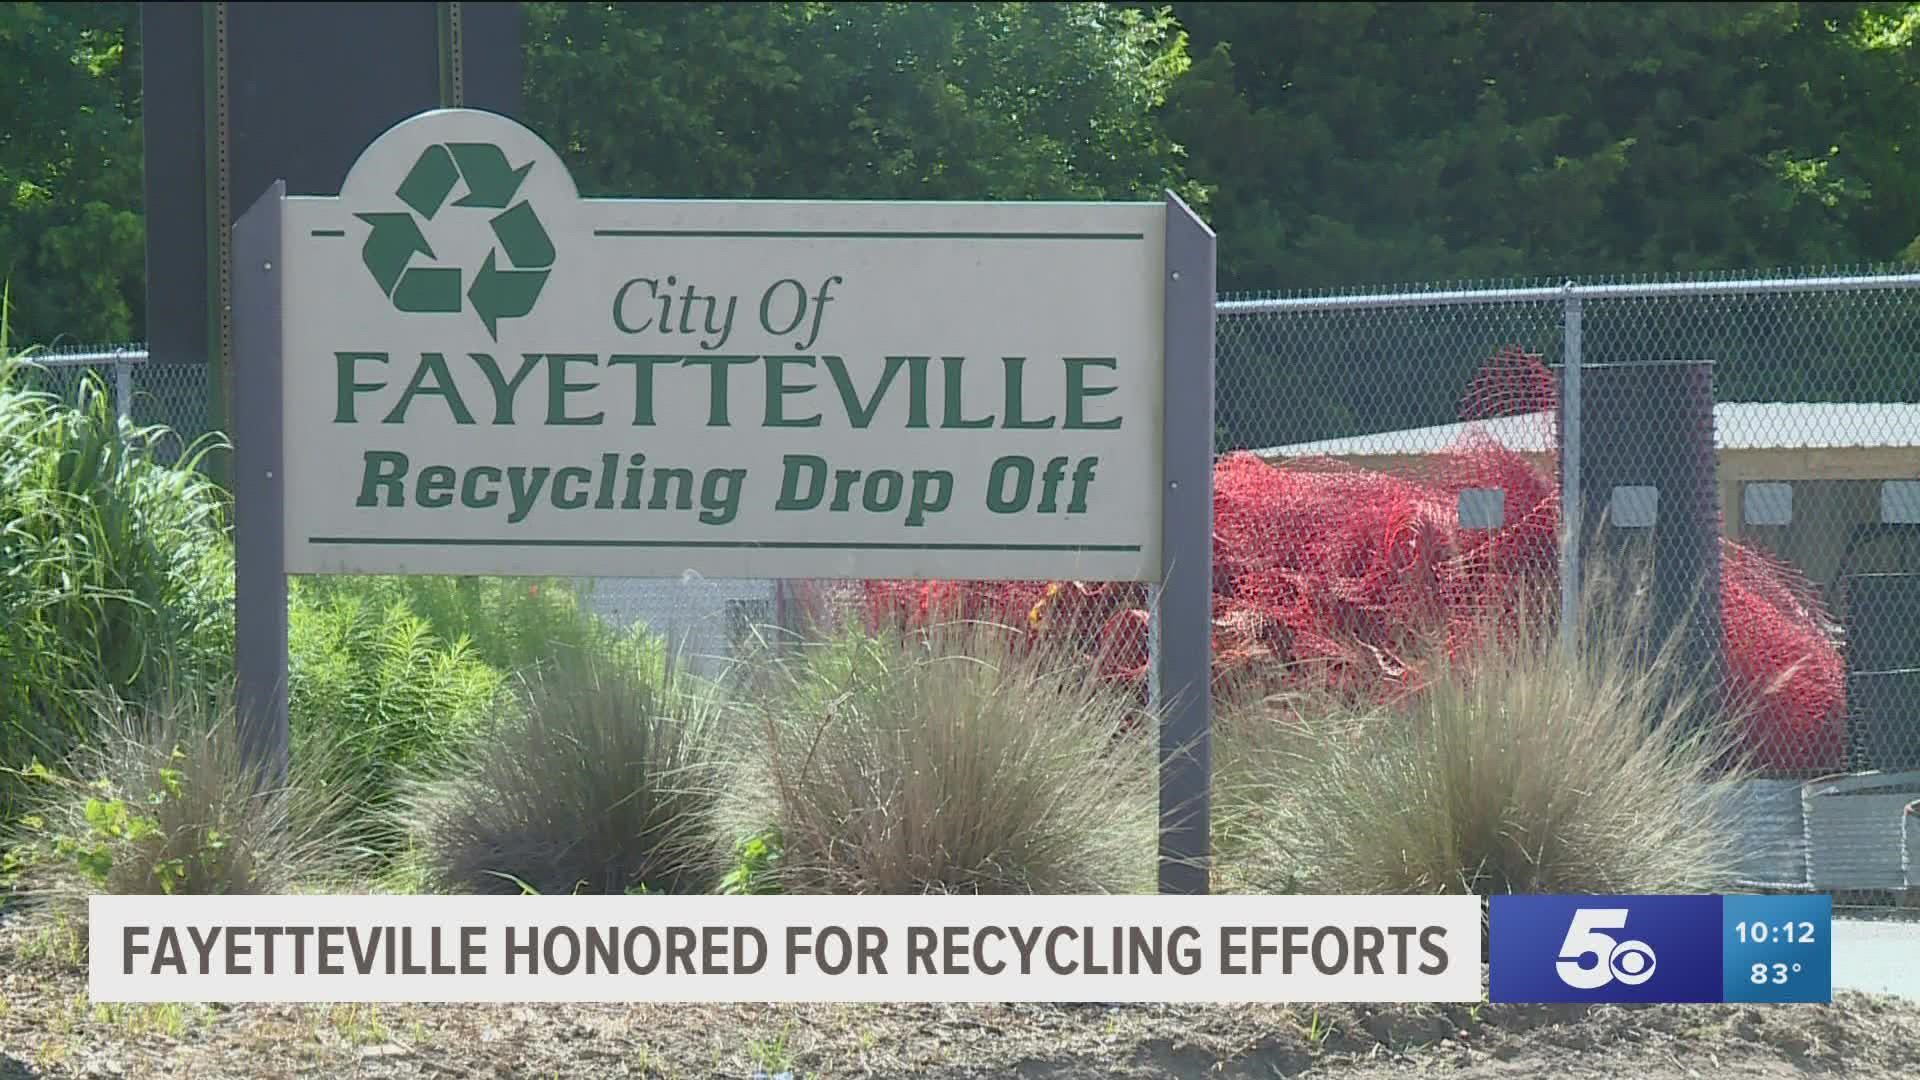 Fayetteville has a 19% recycling rate, with a contamination rate of less than 2%.